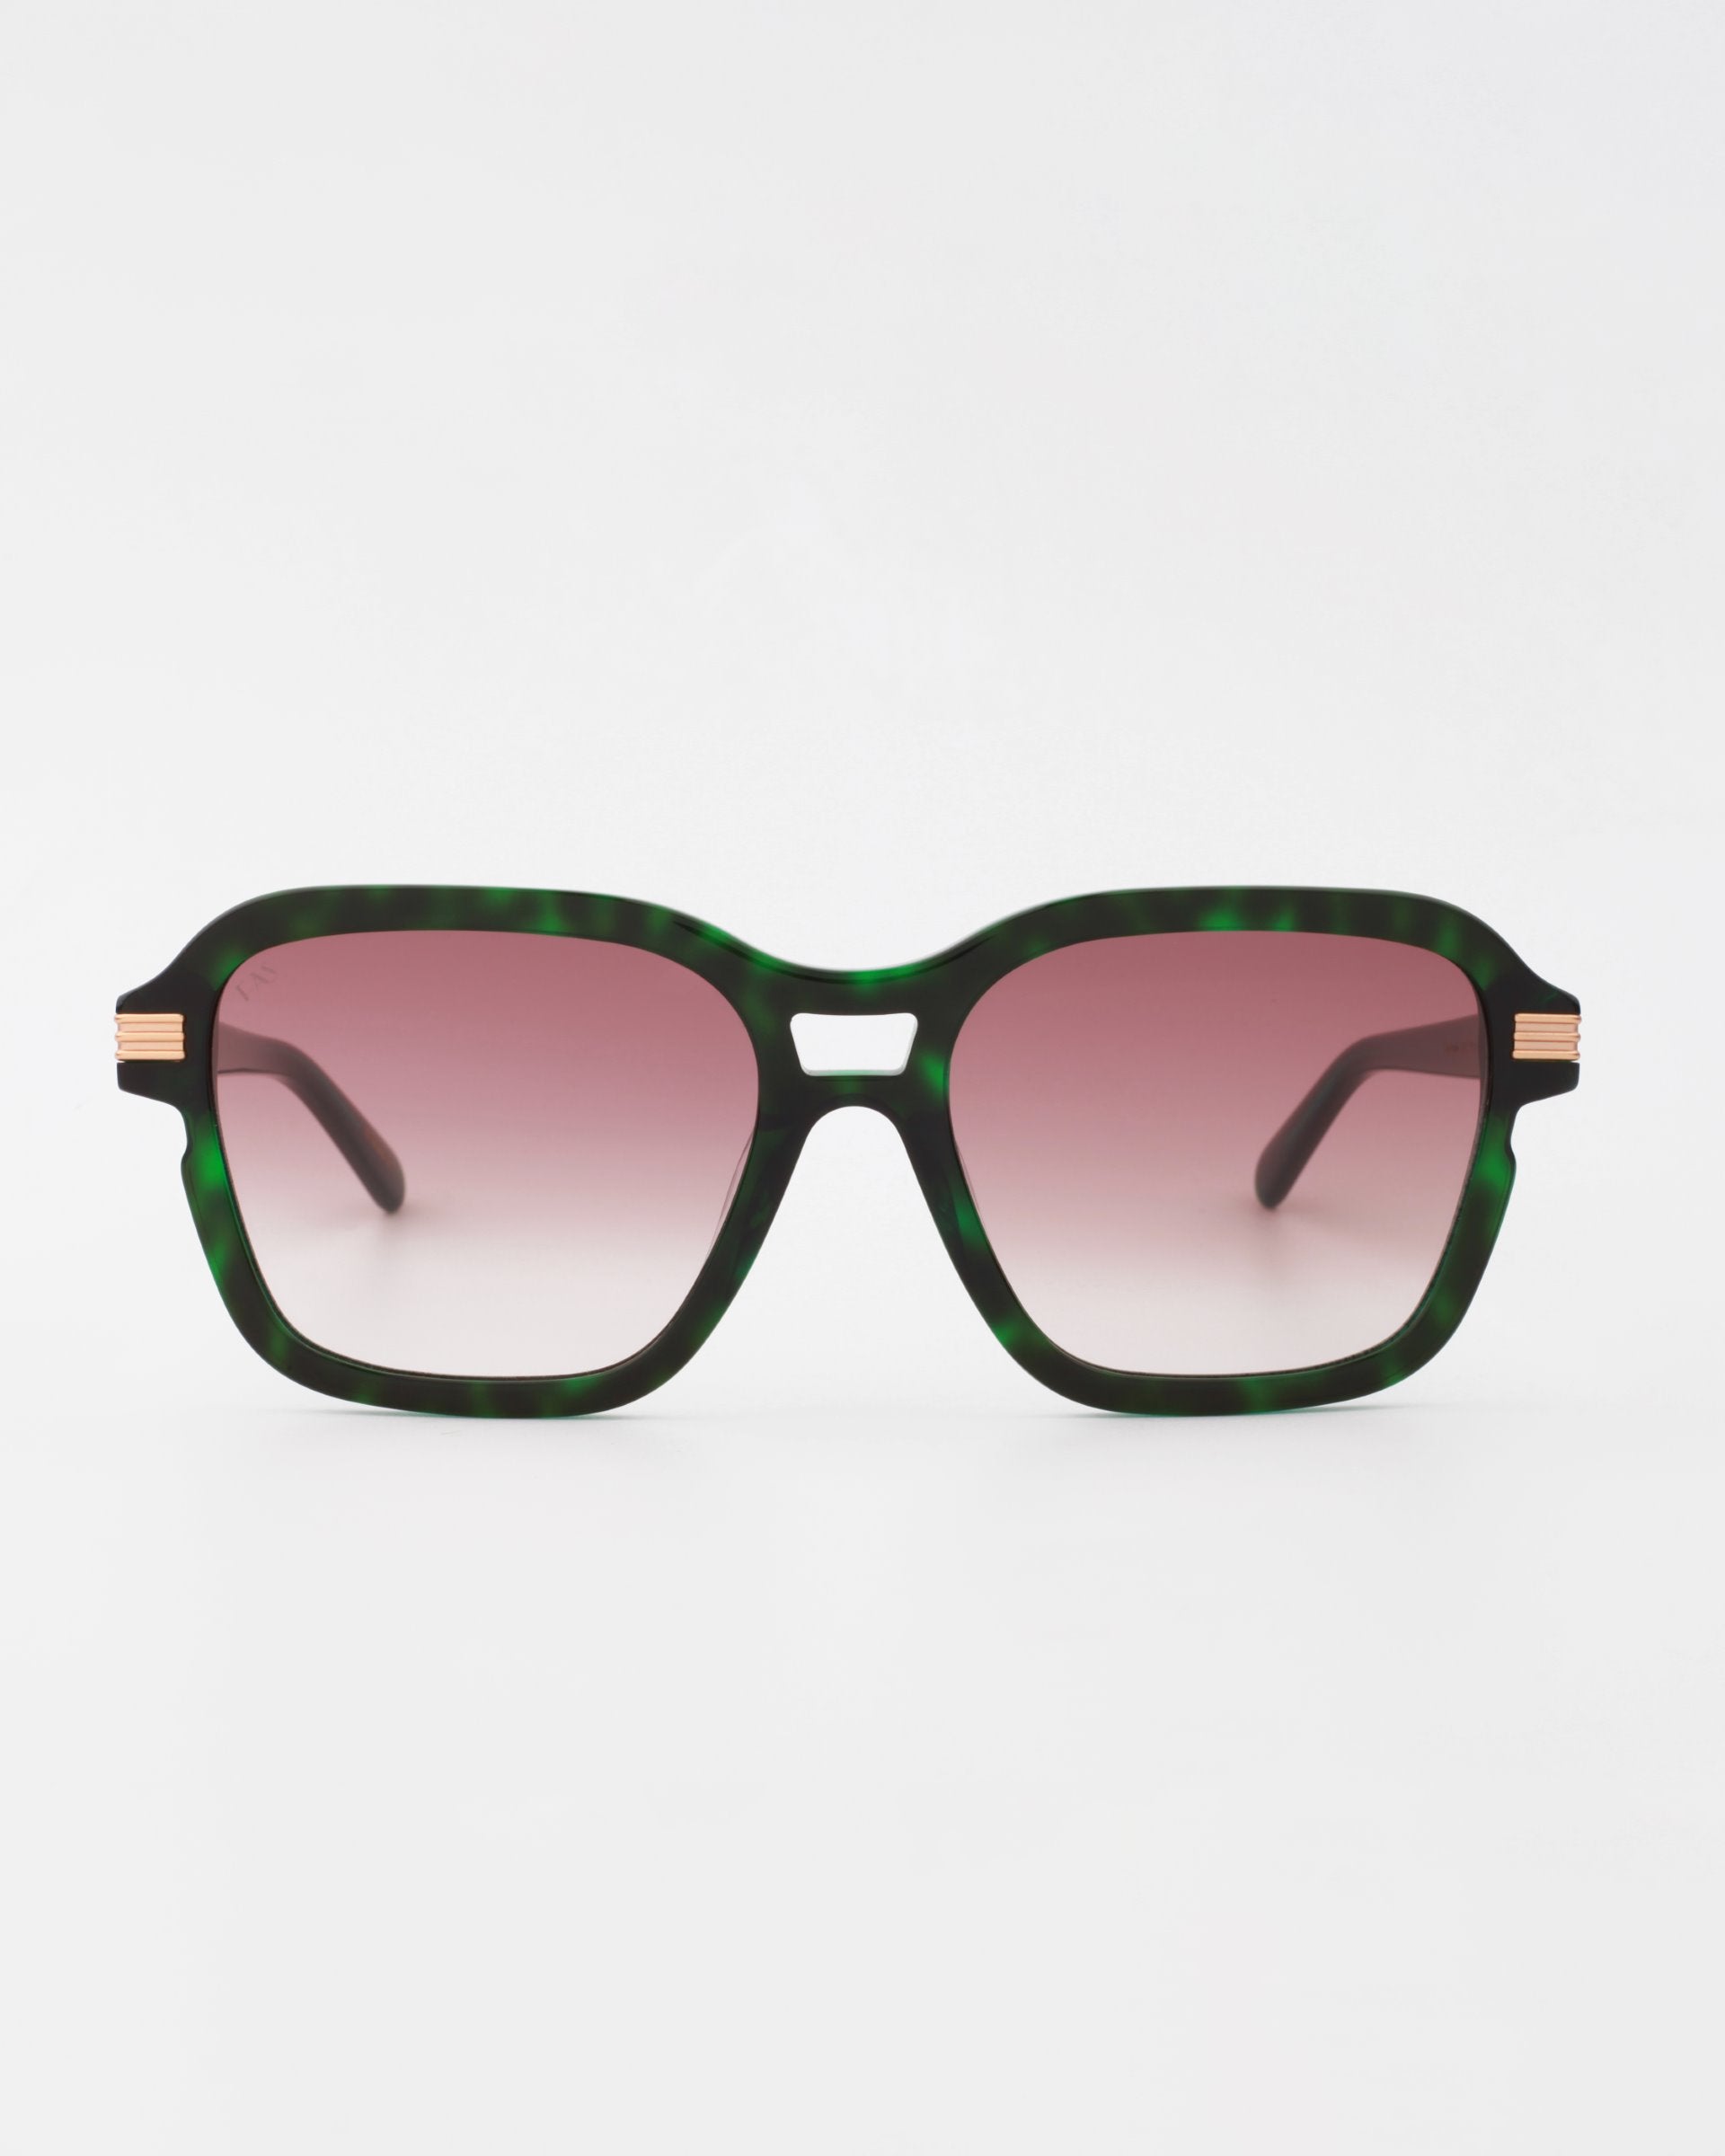 A pair of Shadyside sunglasses by For Art's Sake® with green tortoiseshell frames and shatter-resistant nylon lenses transitioning from pink to clear. The arms are thin and black, accented with gold-plated temple detail near the hinges. Set against a plain white background.